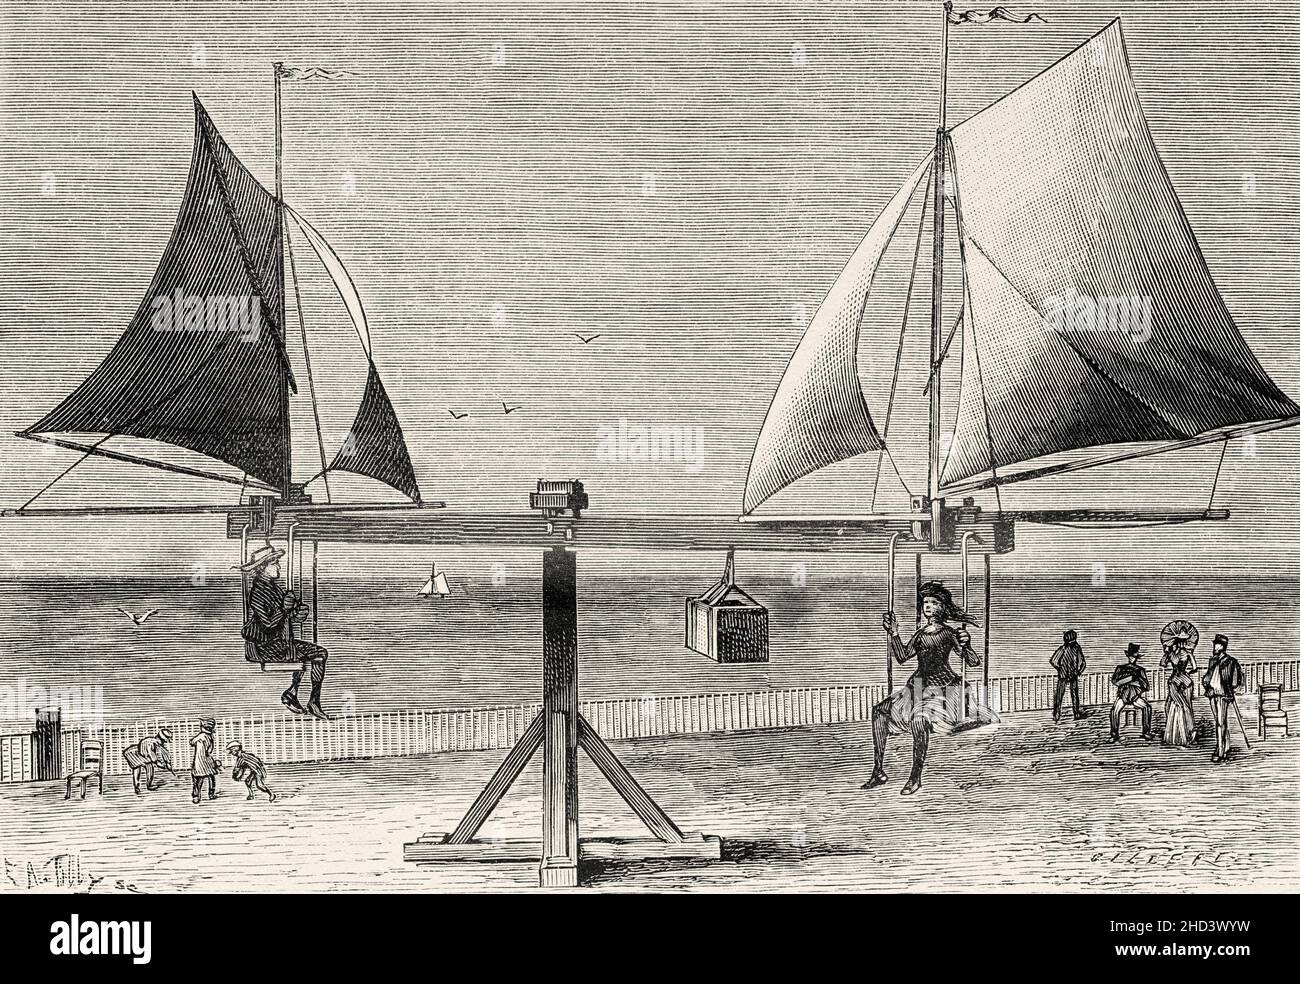 A Raymond Moulton sailing merry-go-round in Saint-Malo, Brittany, France. Old 19th century engraved illustration from La Nature 1885 Stock Photo